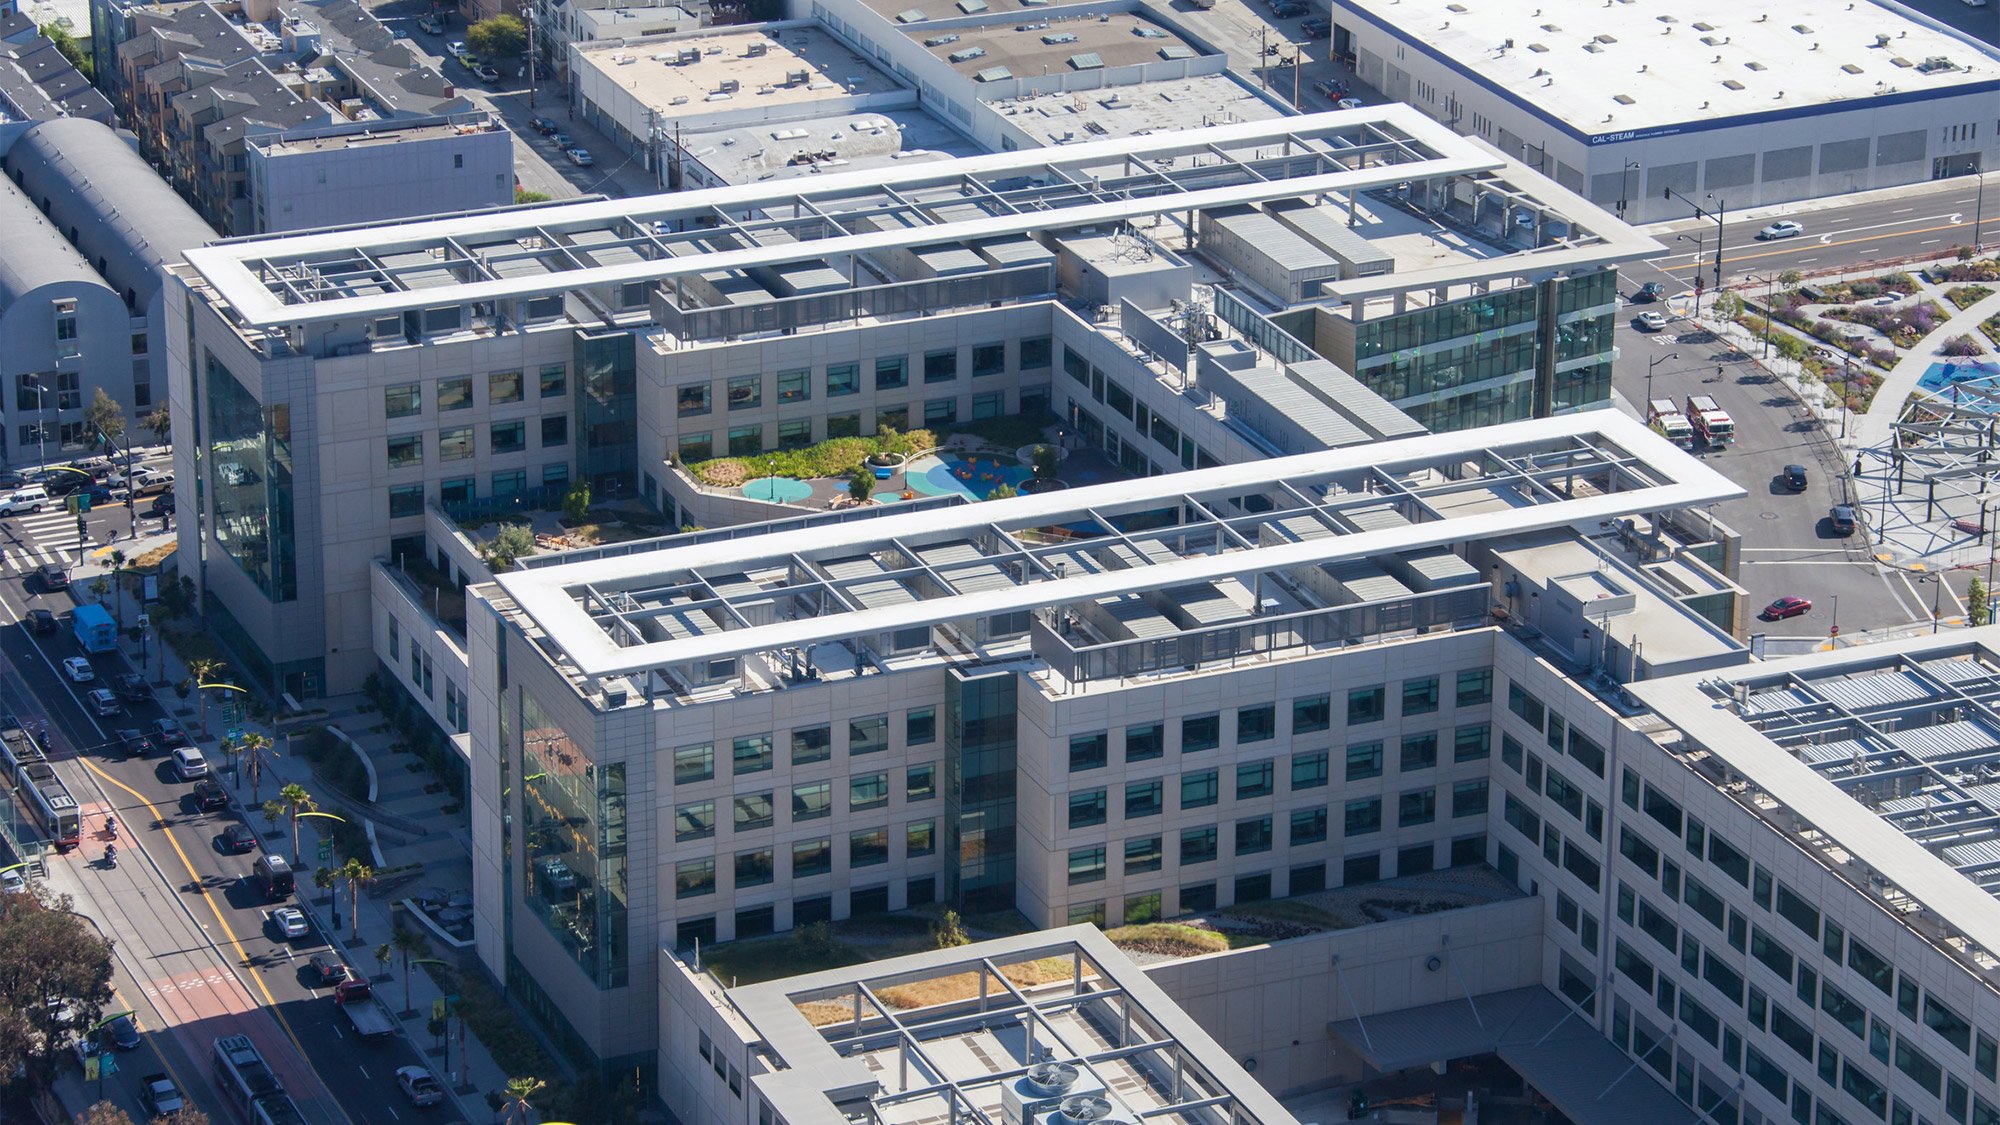 Aerial view of UCSF medical center